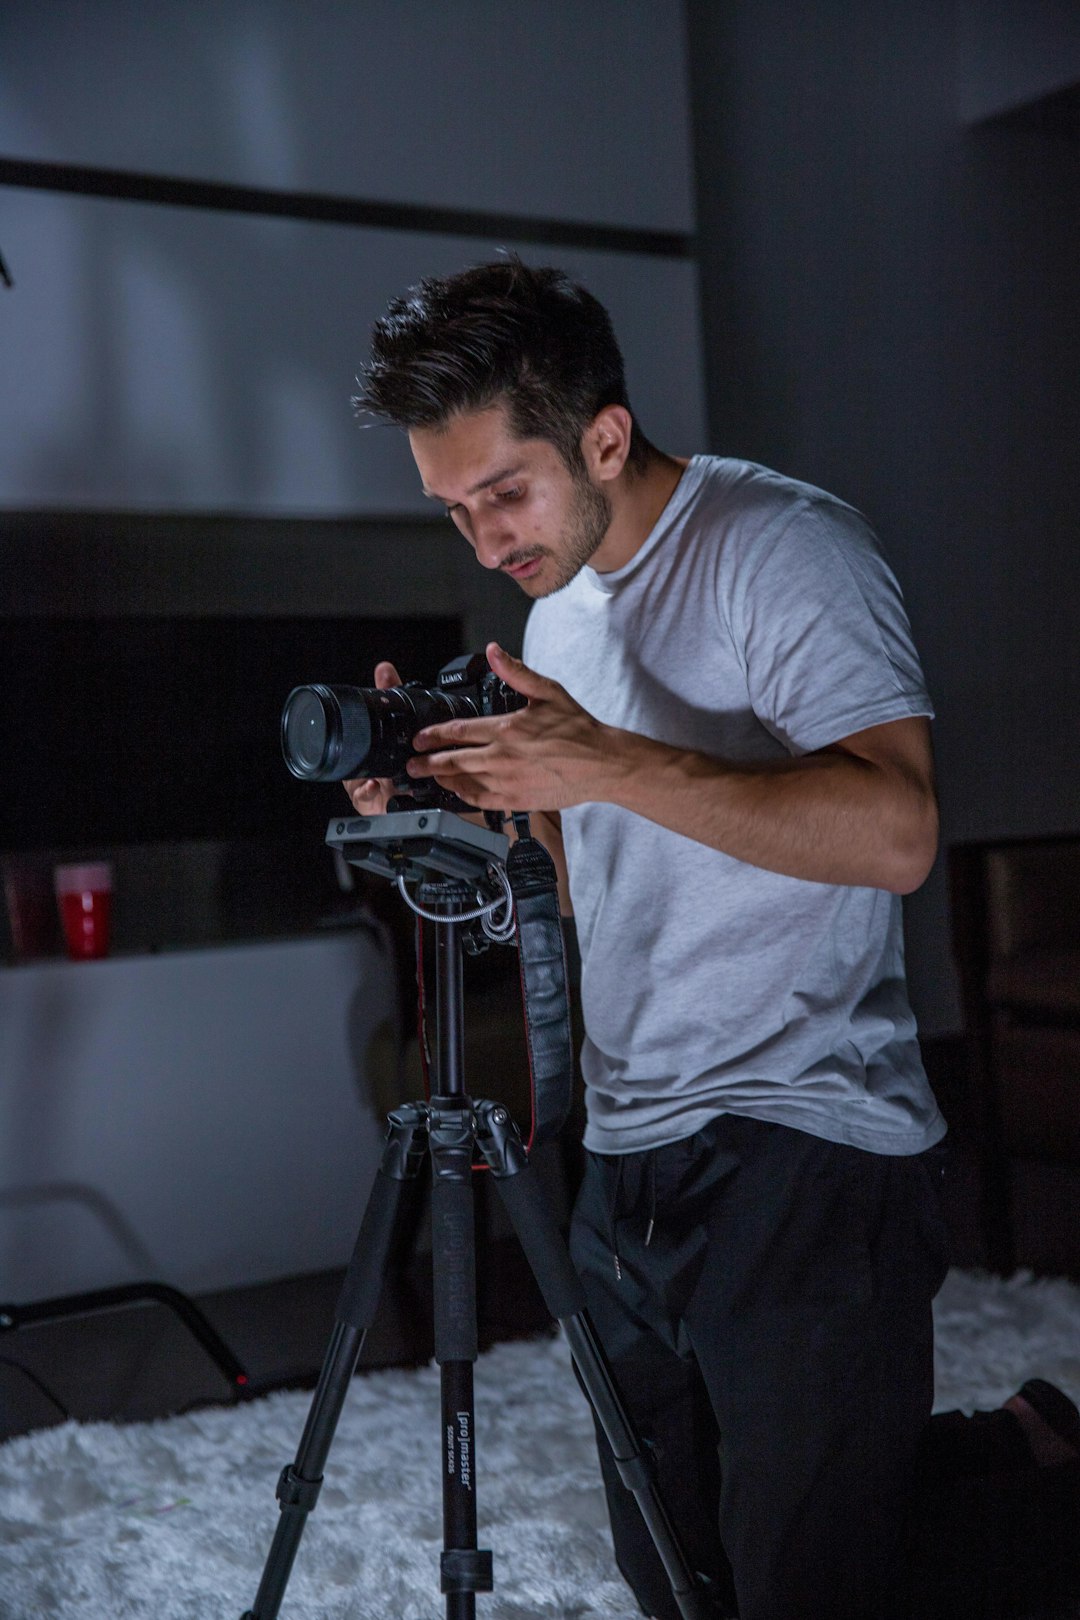 man in room with DSLR camera